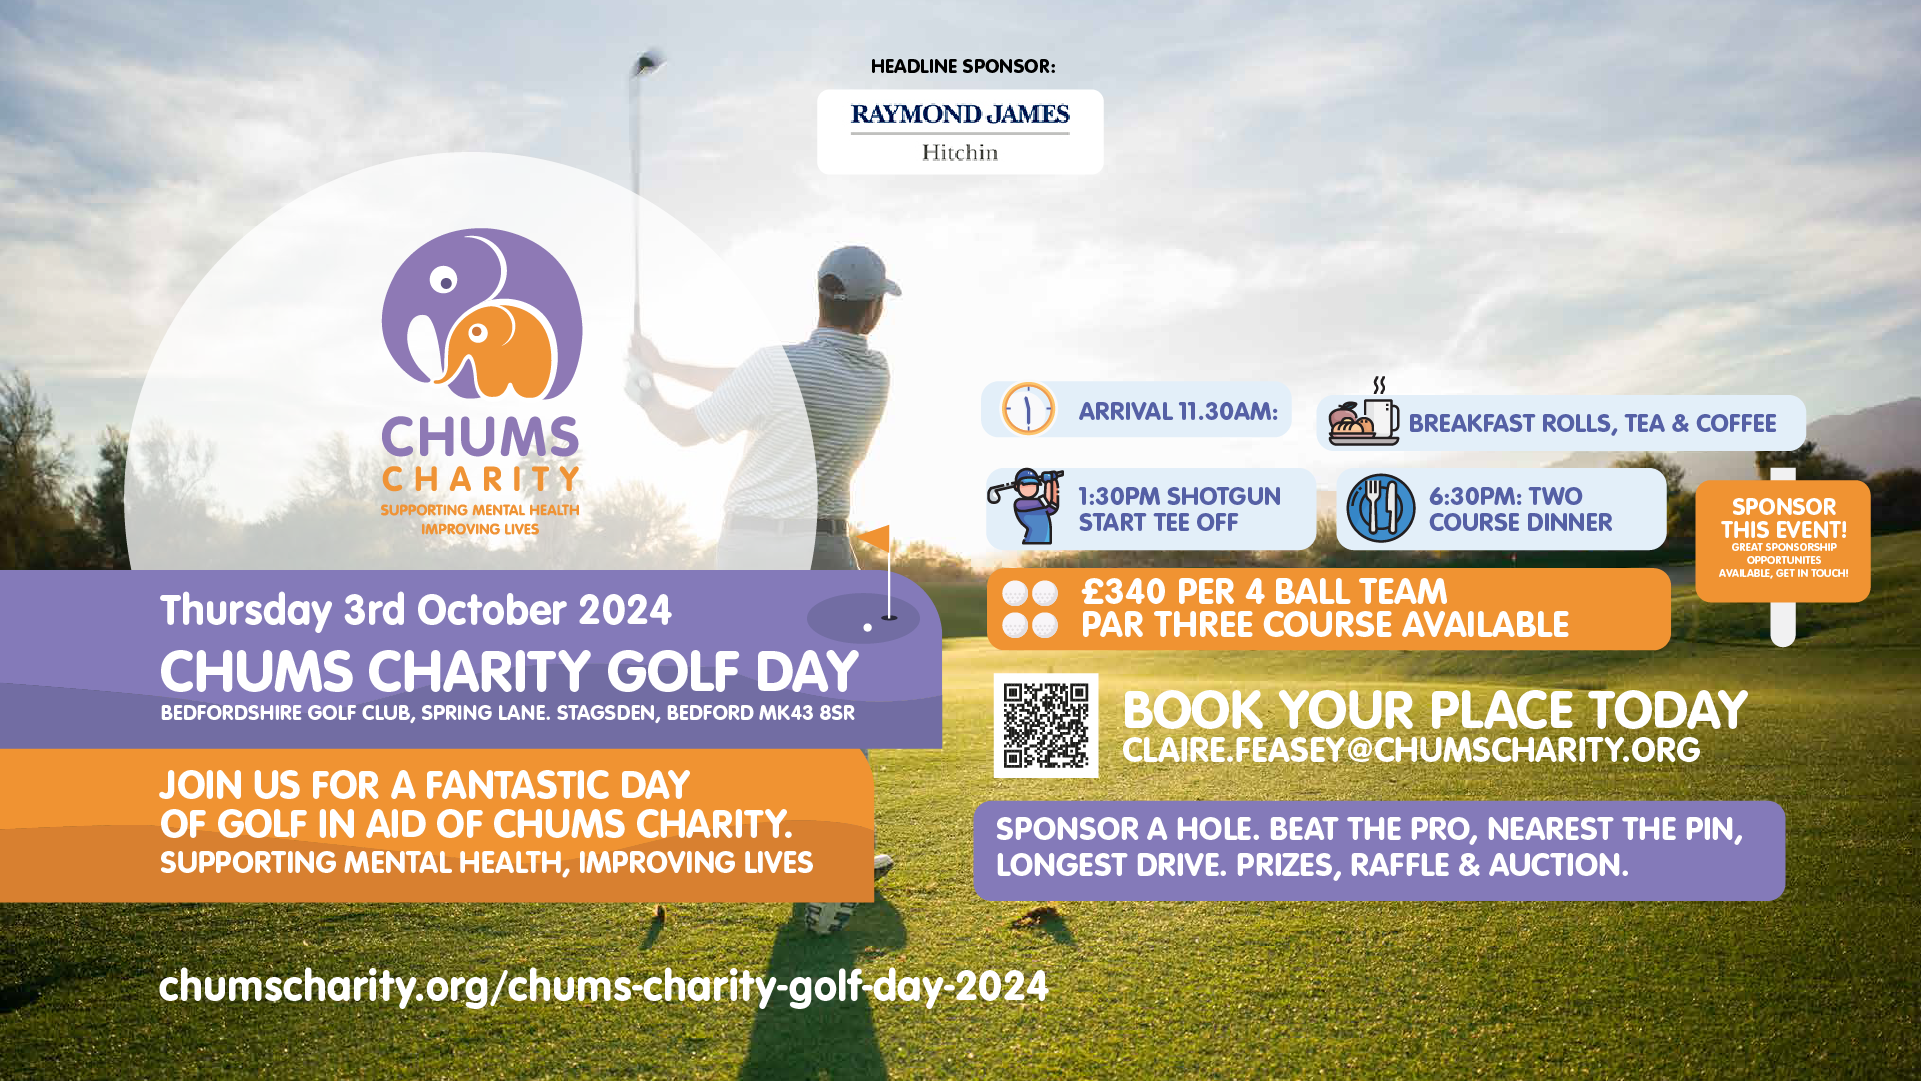 CHUMS Charity Golf Day 2024 - The Bedfordshire Golf Club